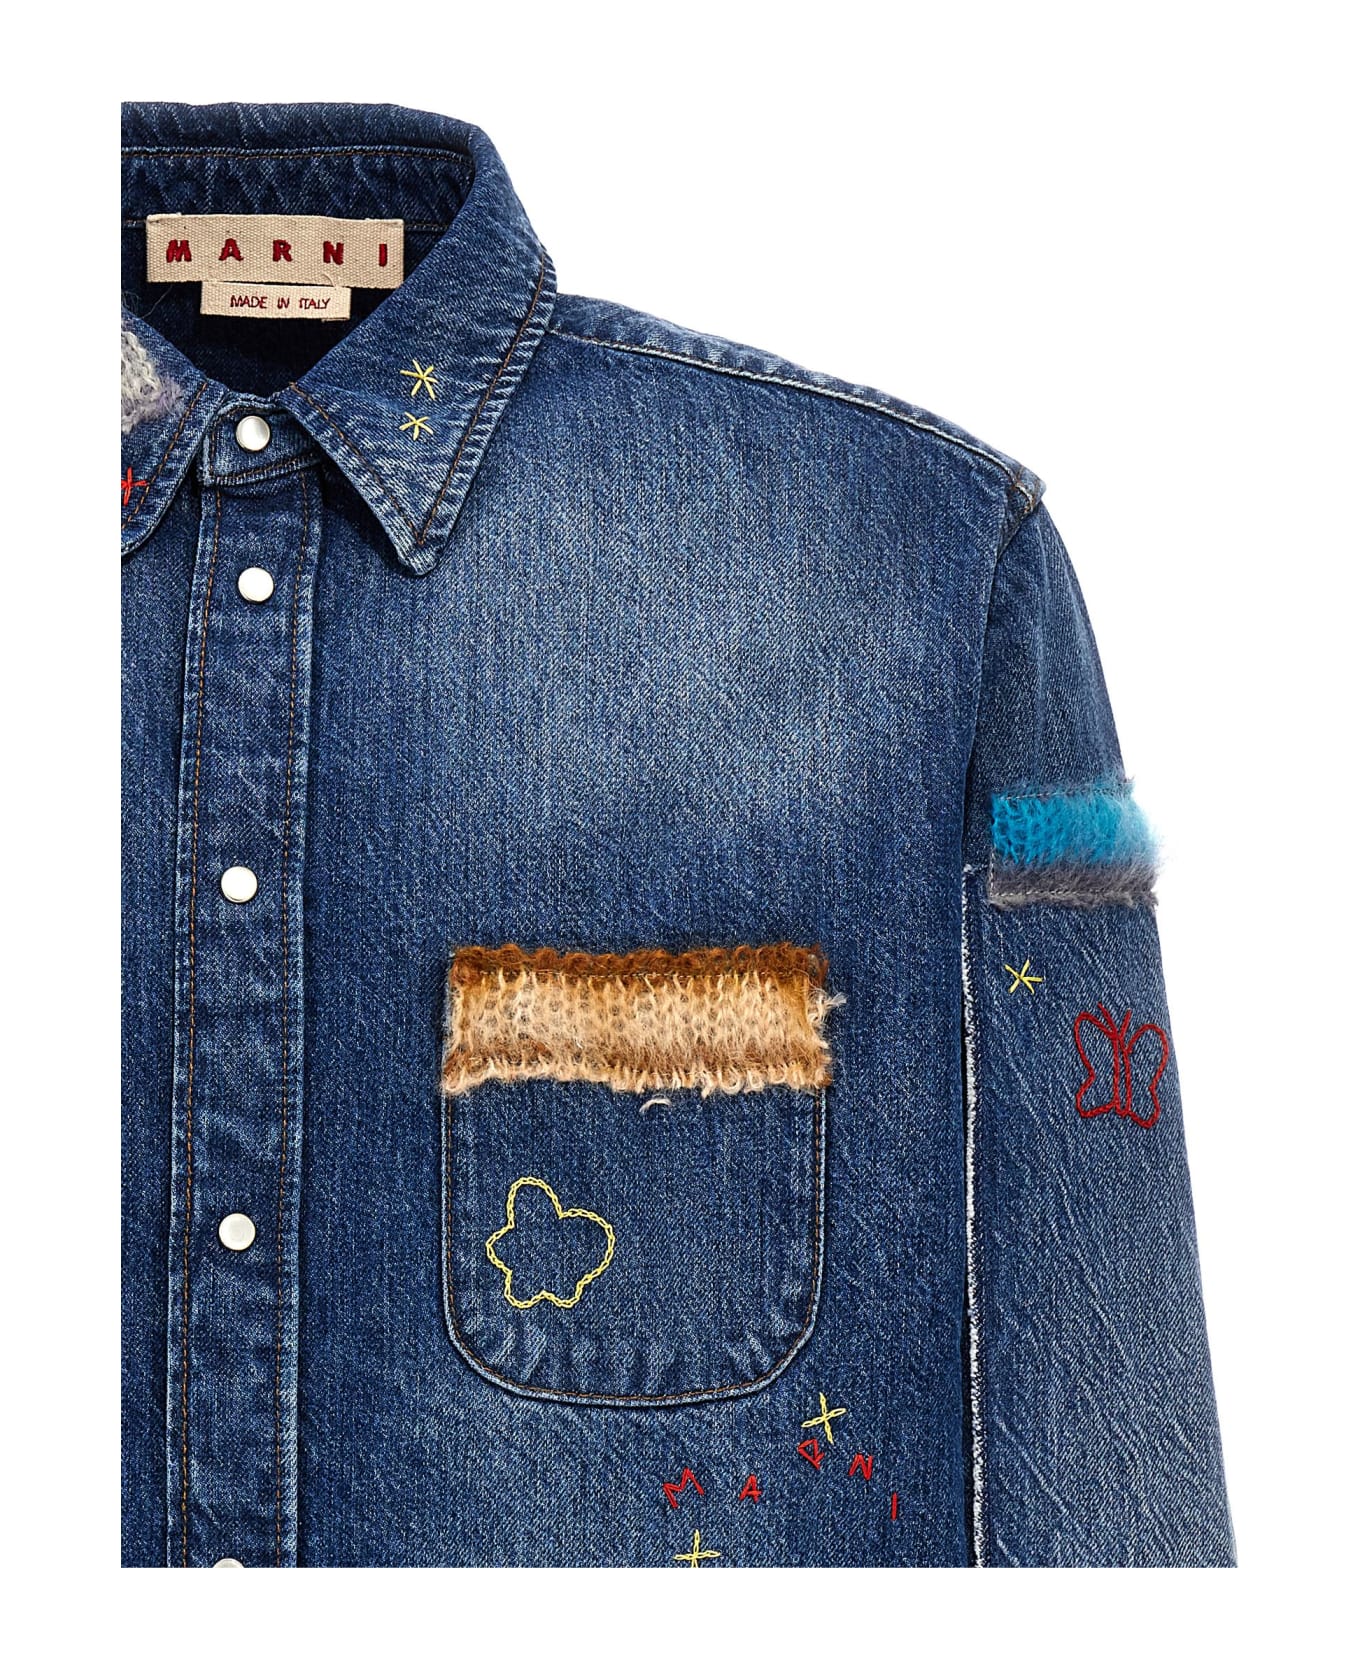 Marni Denim Shirt, Embroidery And Patches - Blu